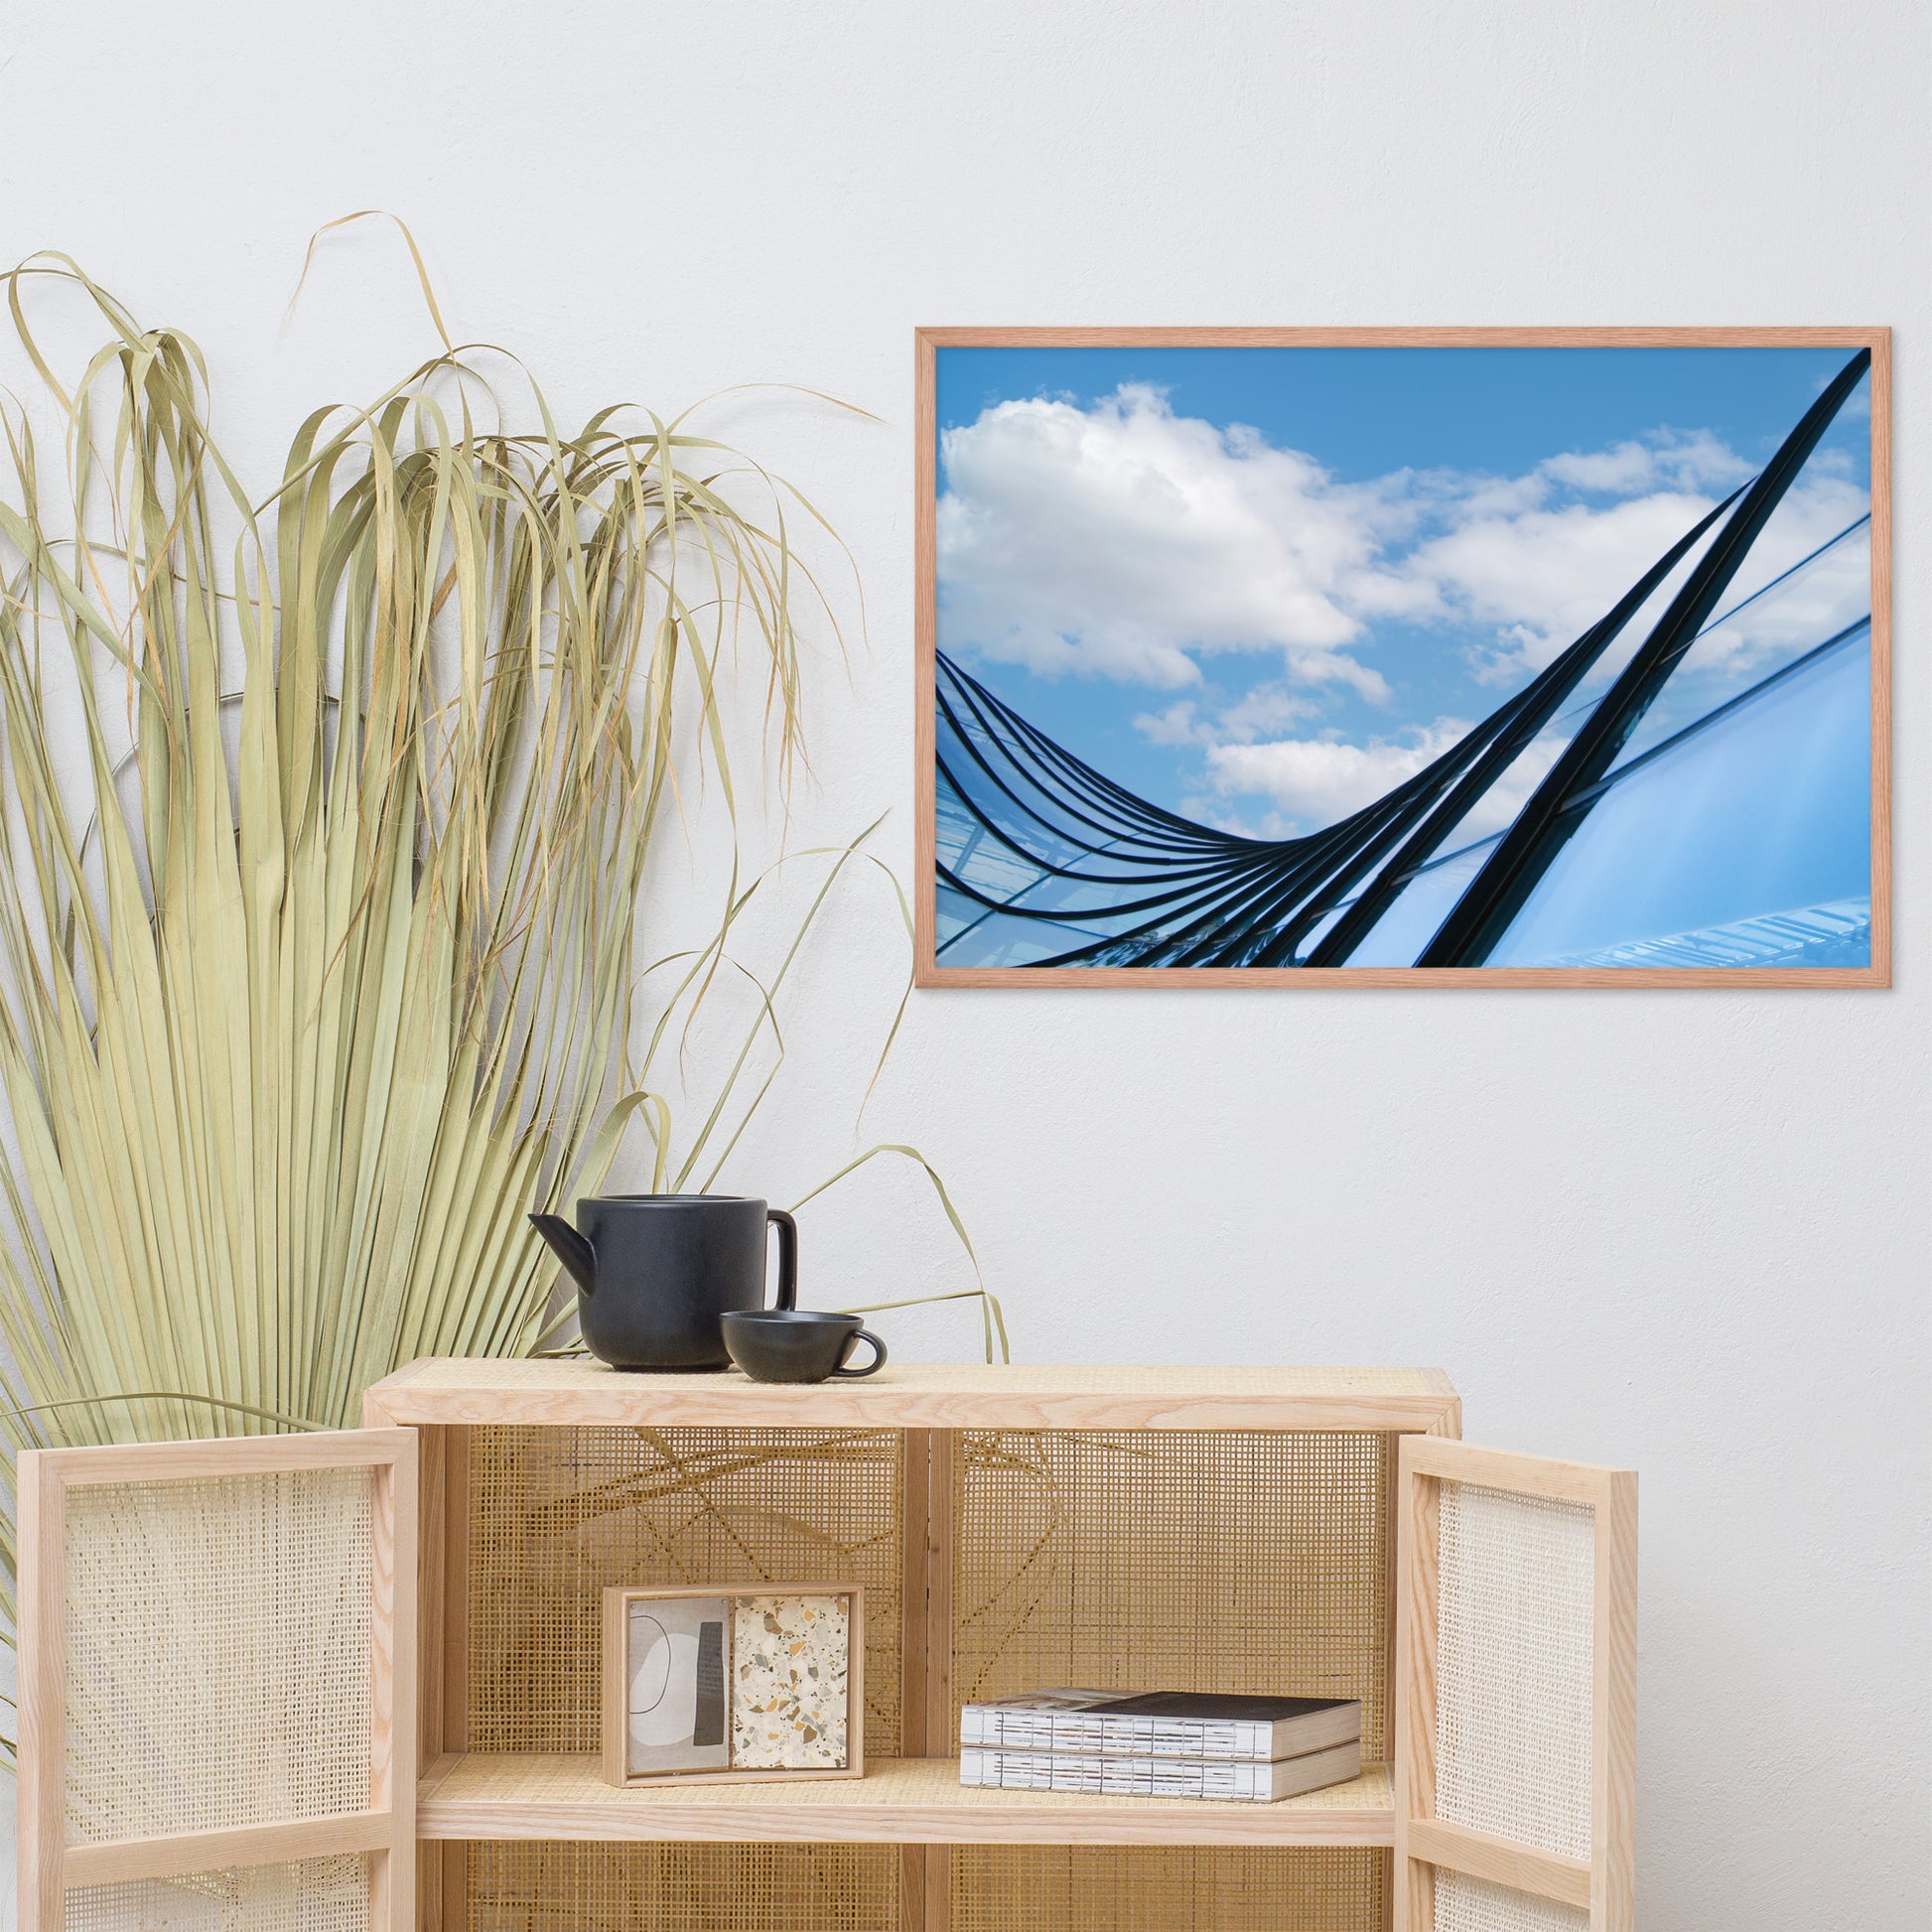 Glass and Azure Architectural Photograph Framed Wall Art Print